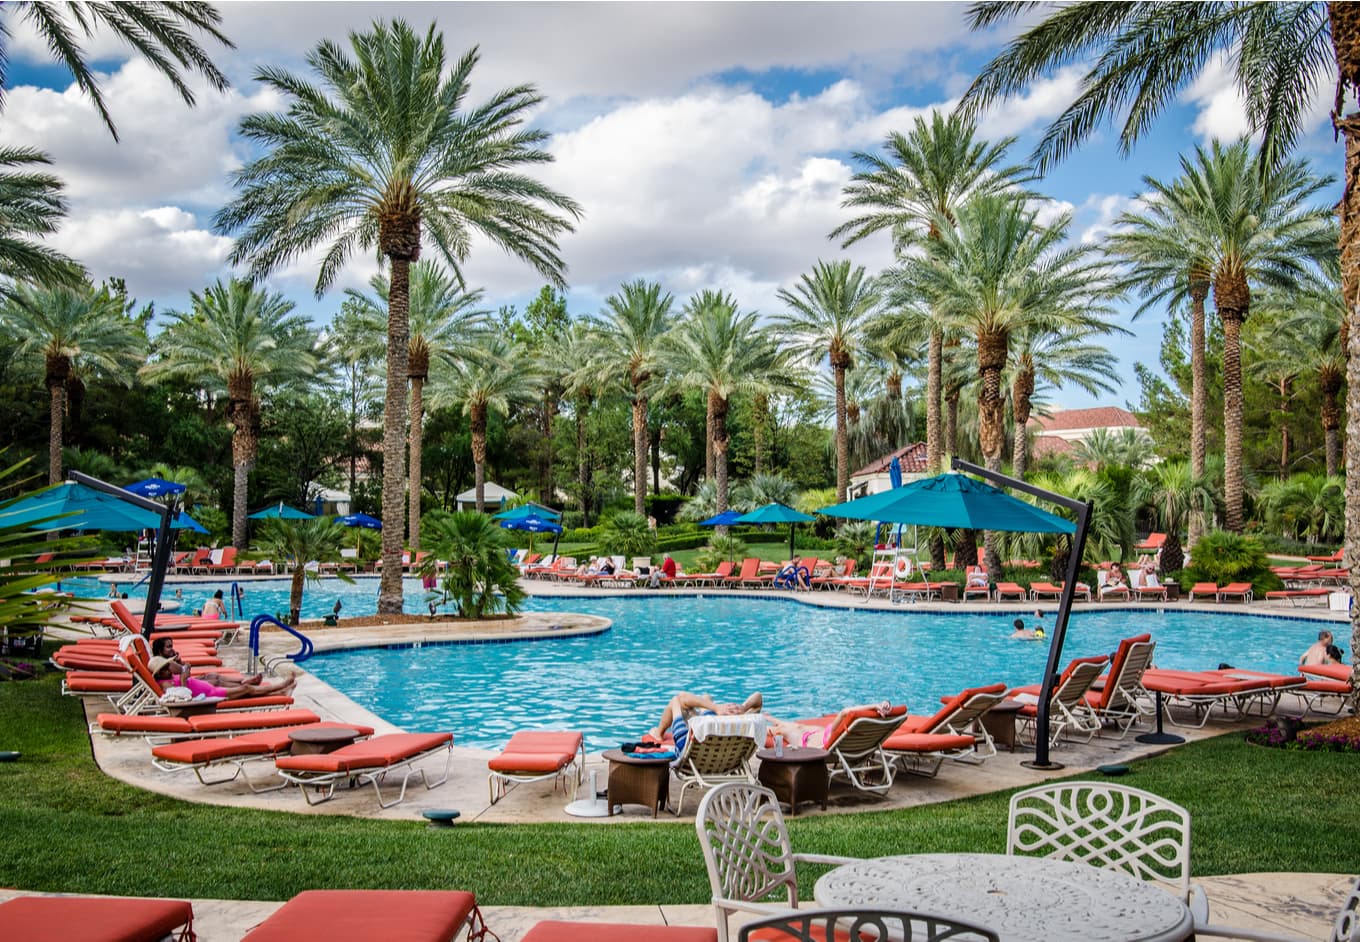 JW Marriott Las Vegas Resort & Spa is one of the best places to